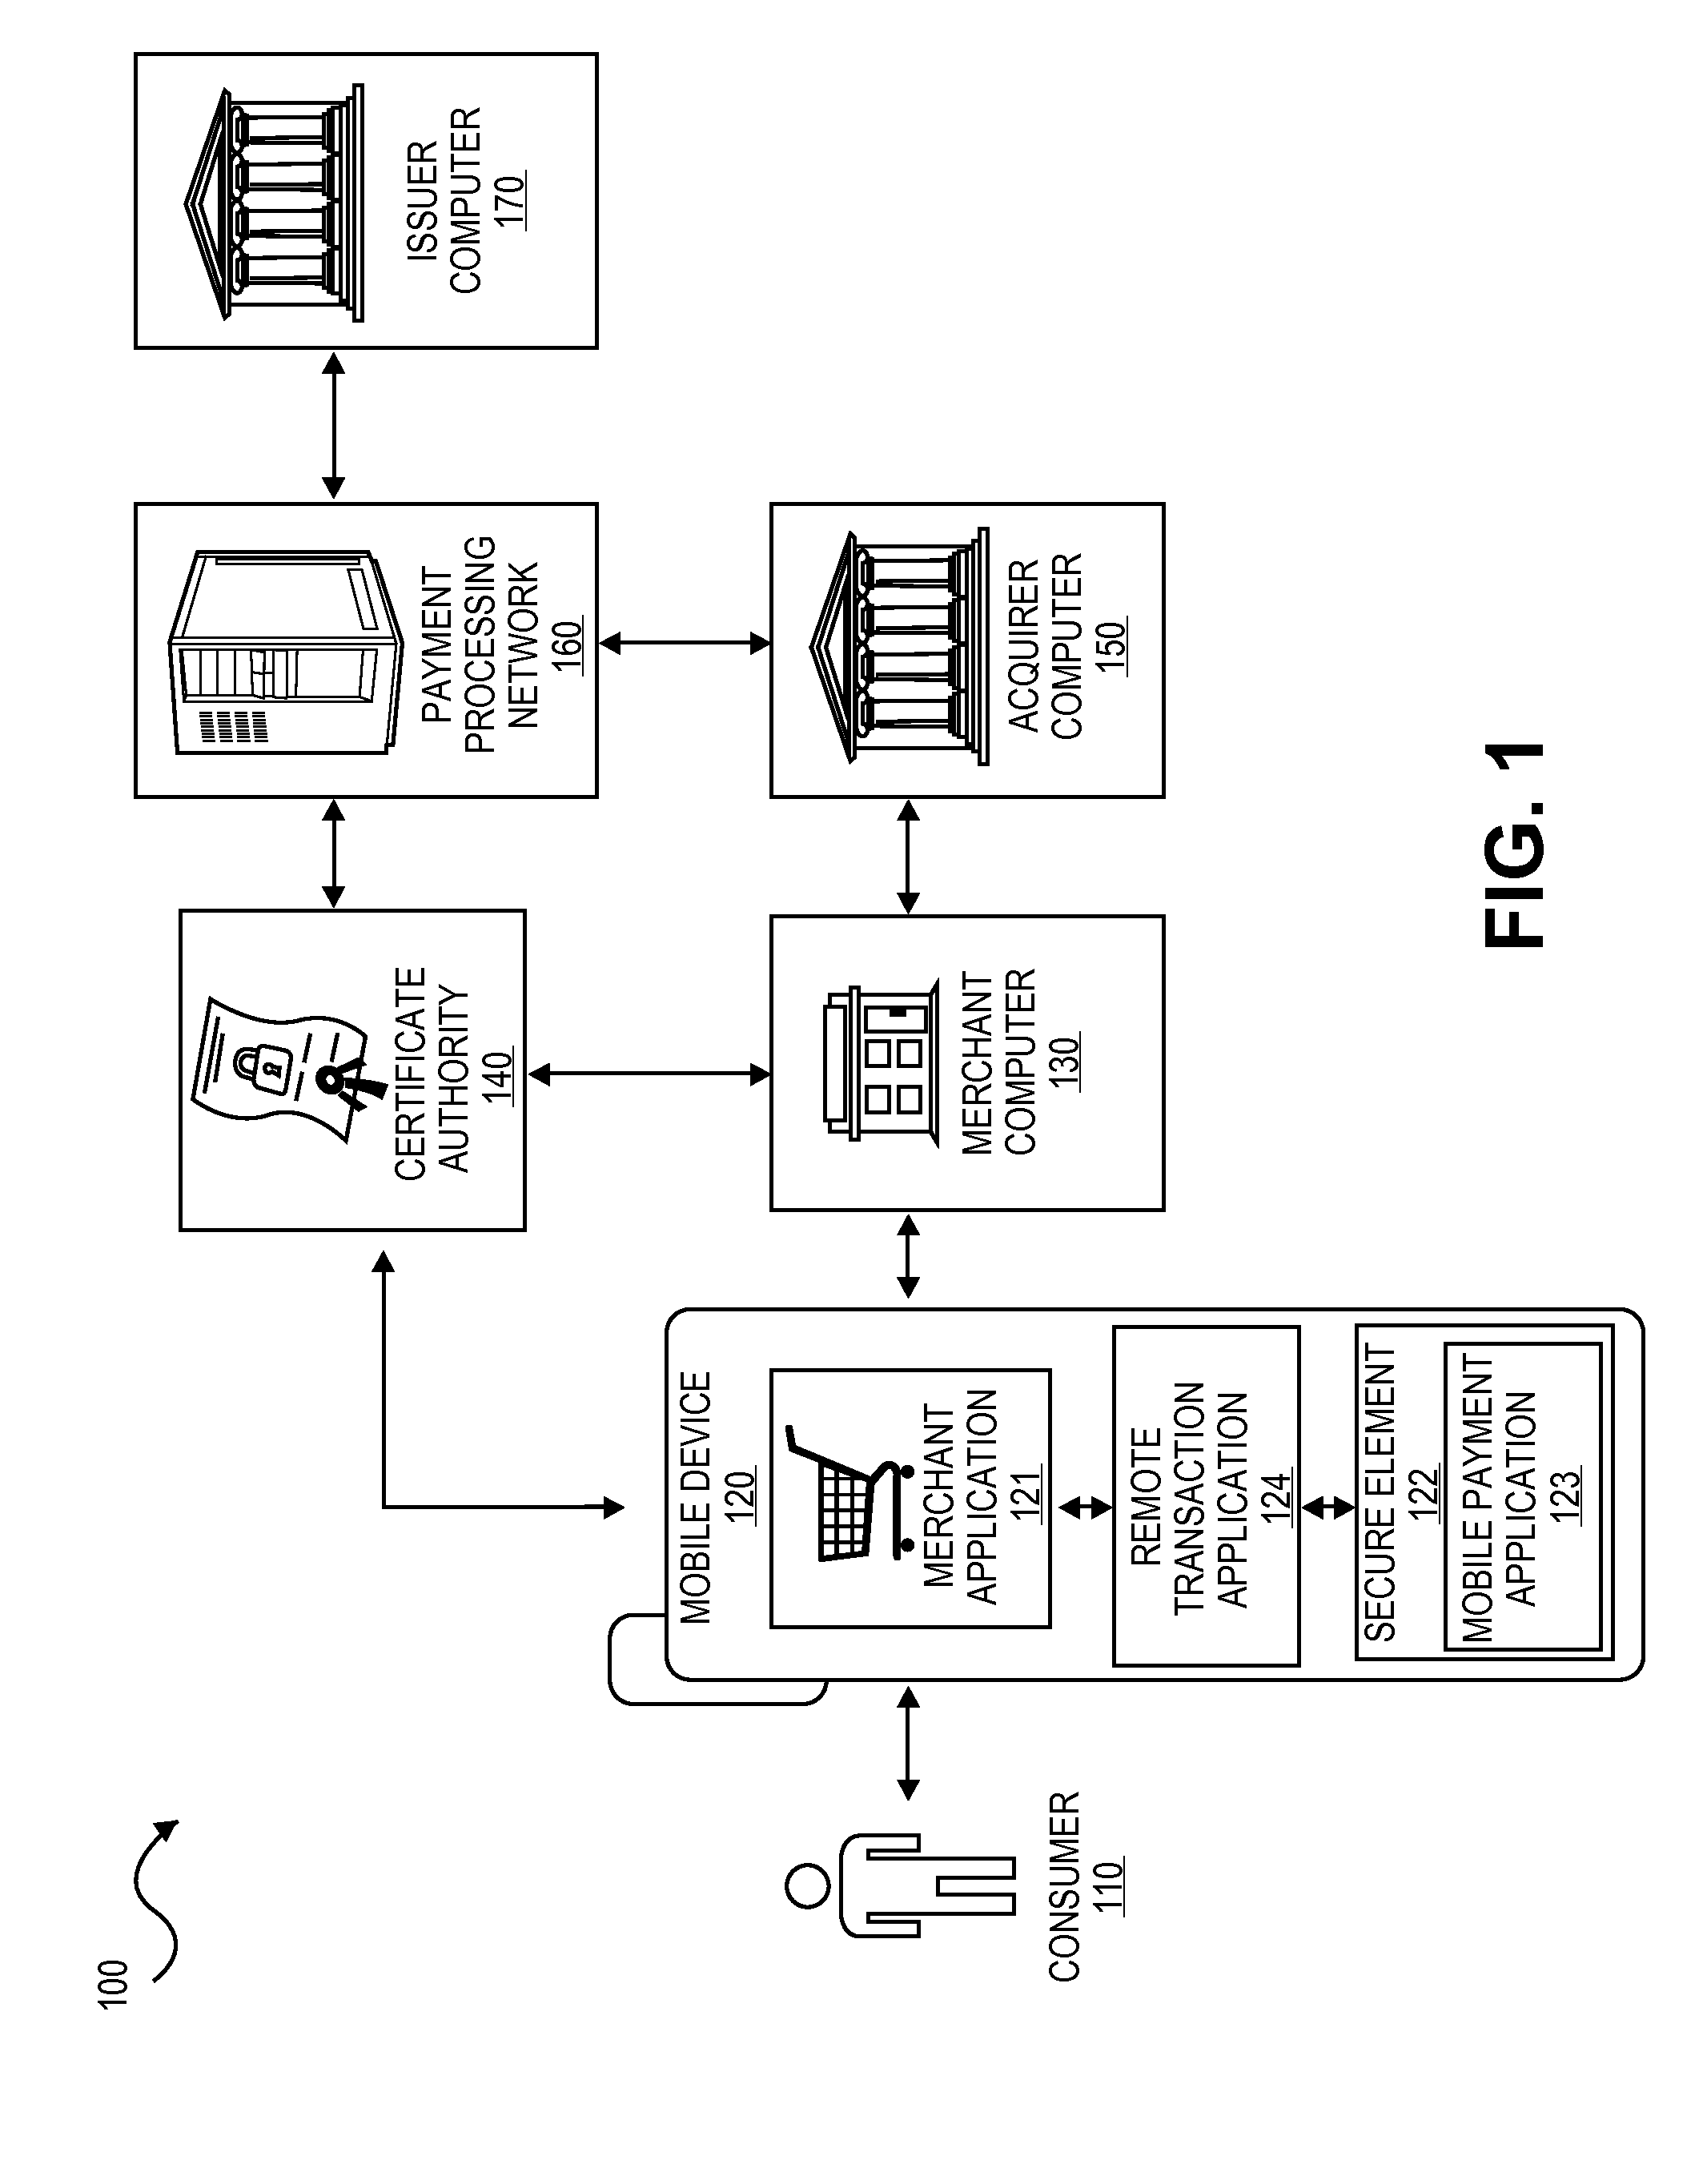 Secure Remote Payment Transaction Processing Using a Secure Element